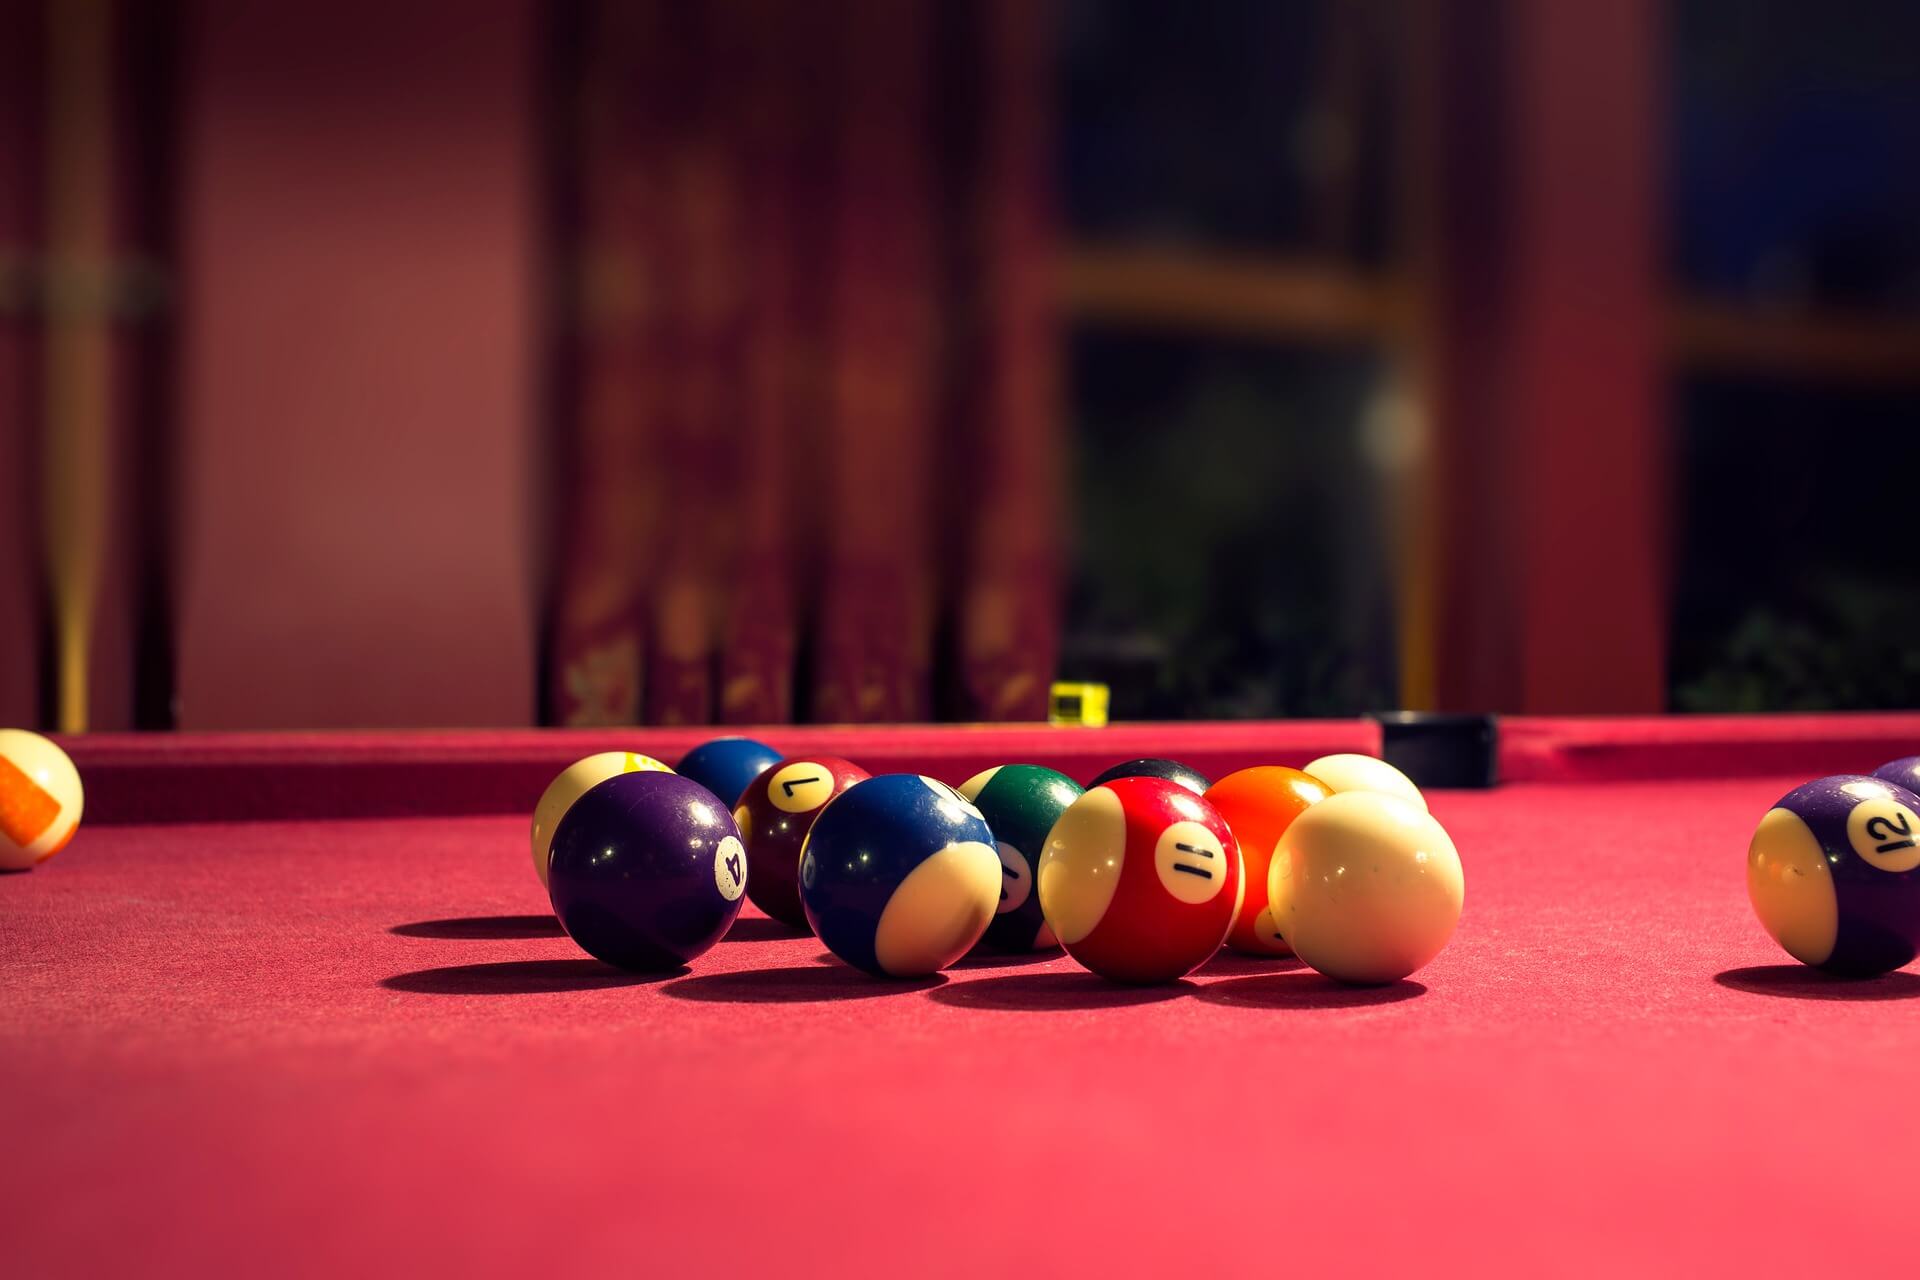 about hotel games